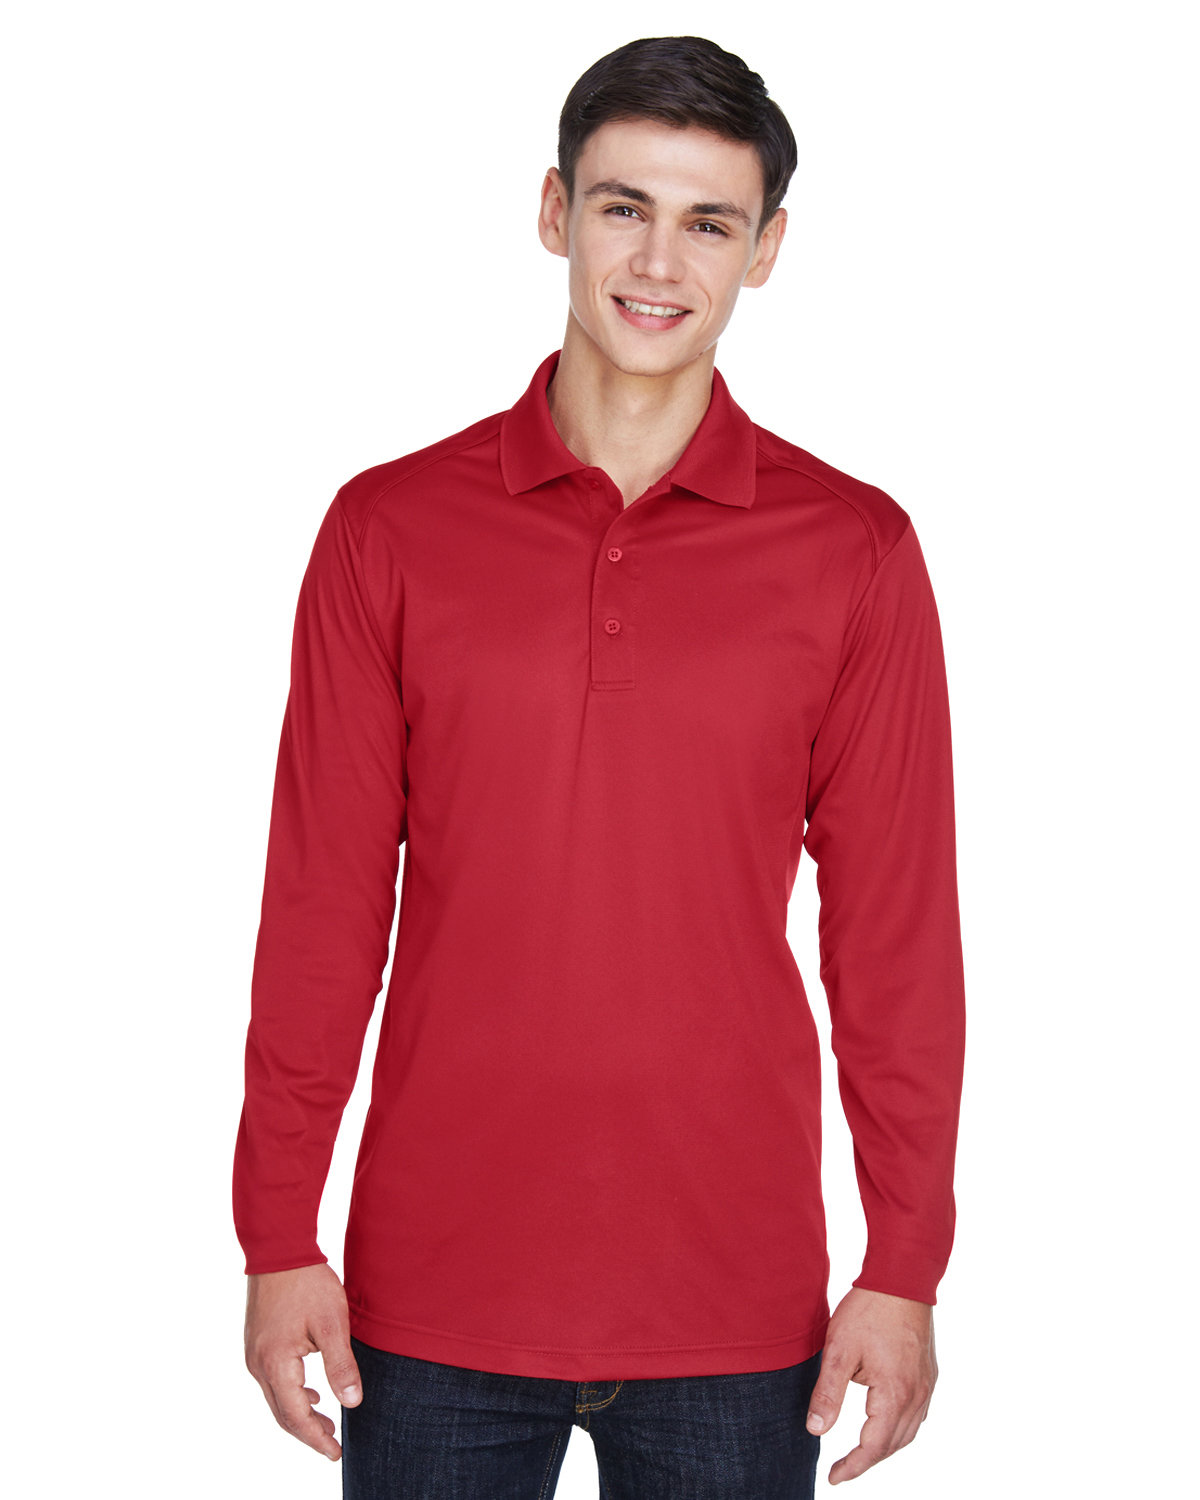 Extreme Men's Eperformance™ Snag Protection Long-Sleeve Polo CLASSIC RED 